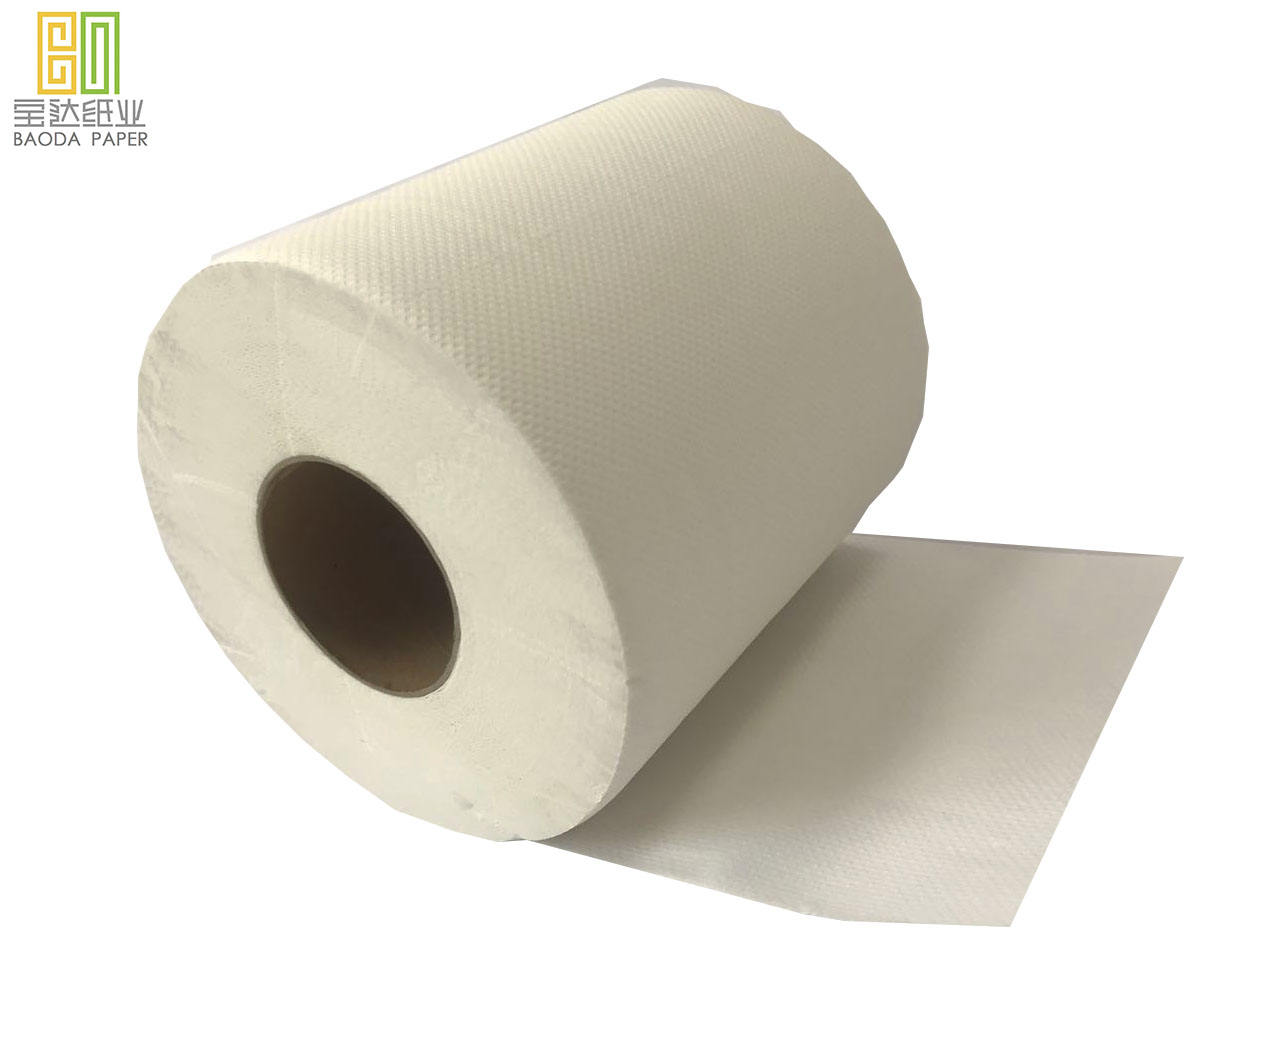 Good quality low price Fashionable slim fold paper towels paper towels restroom kitchen paper towels